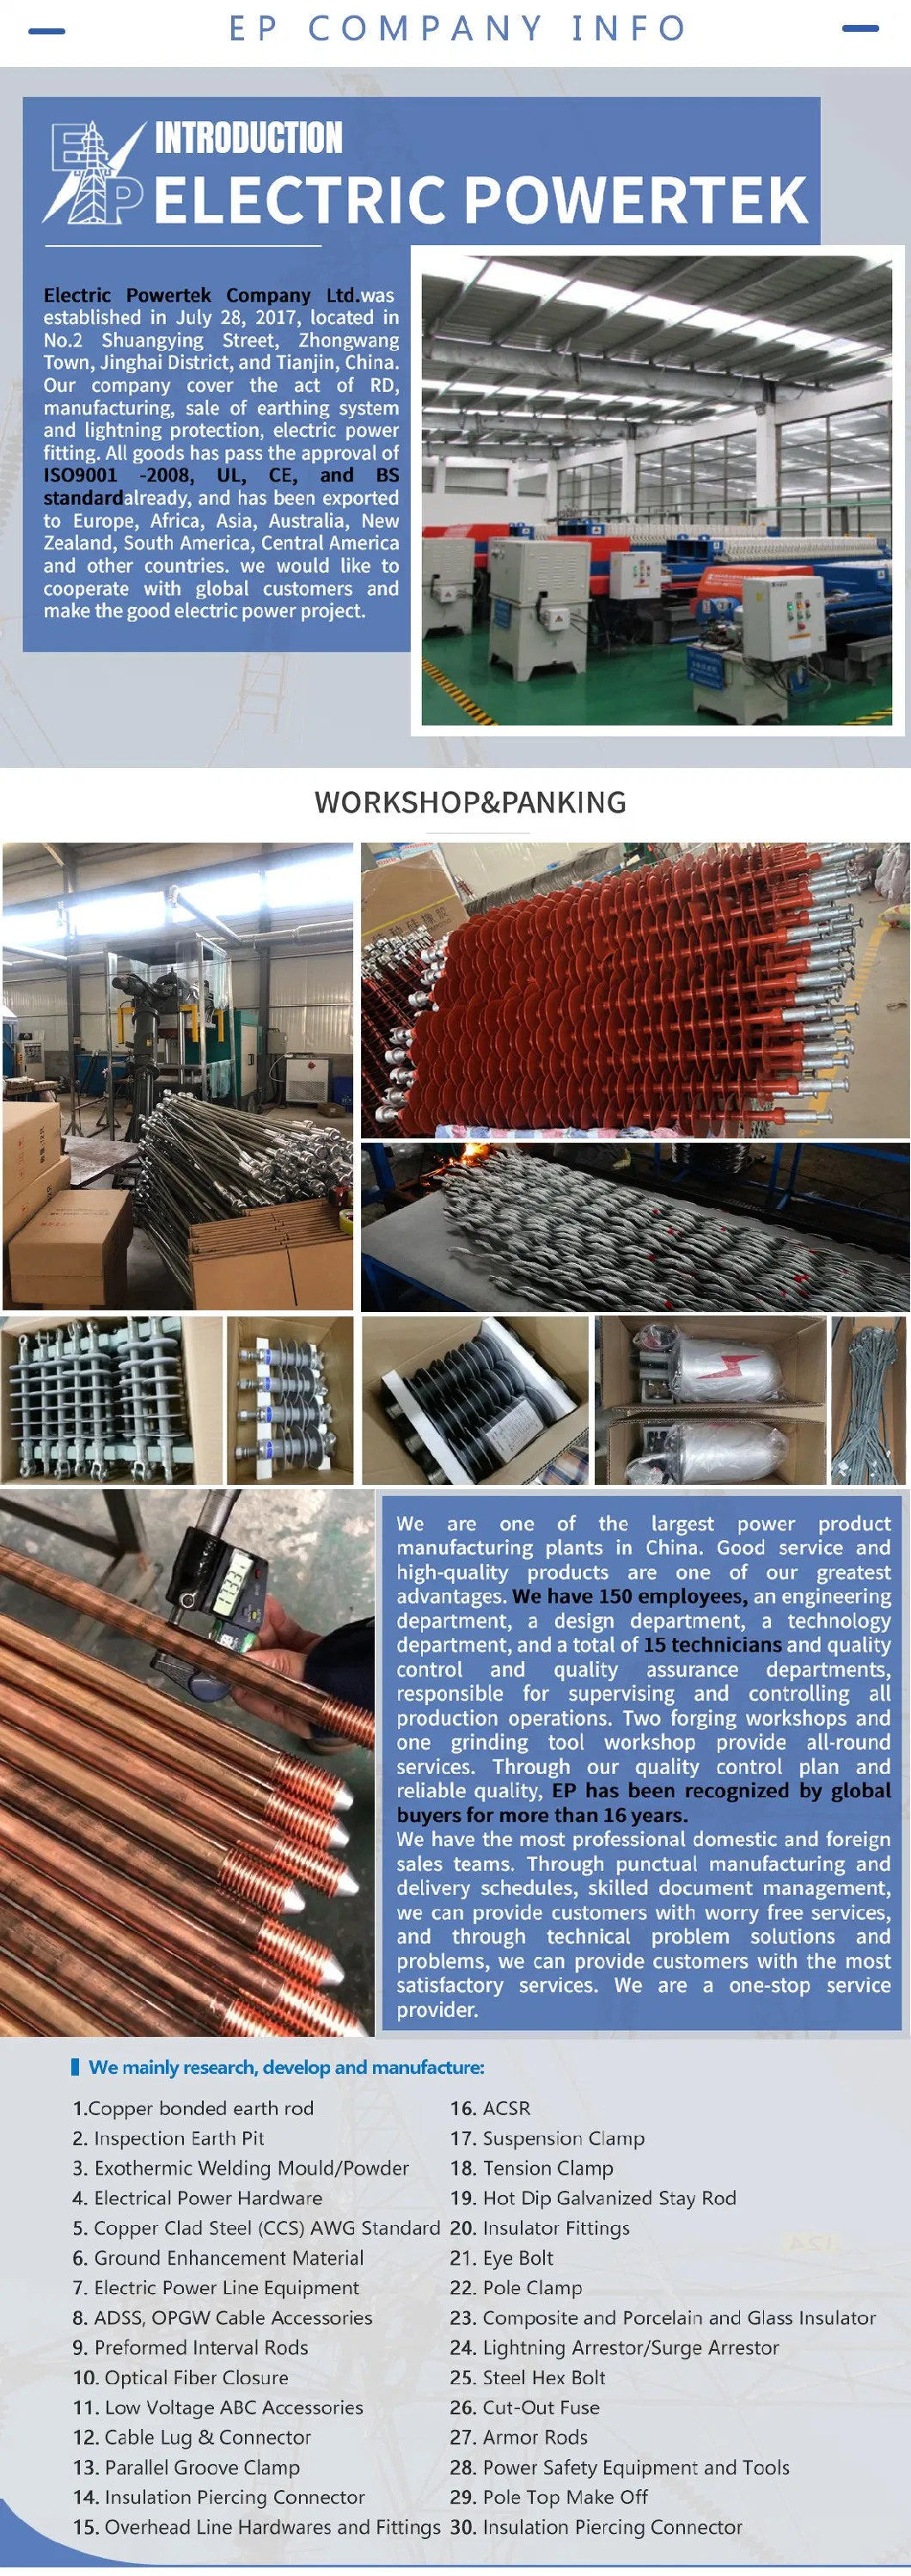 Price Copperweld Clad Steel Copper Bonded Ground Earth Rod for Earthing System Material